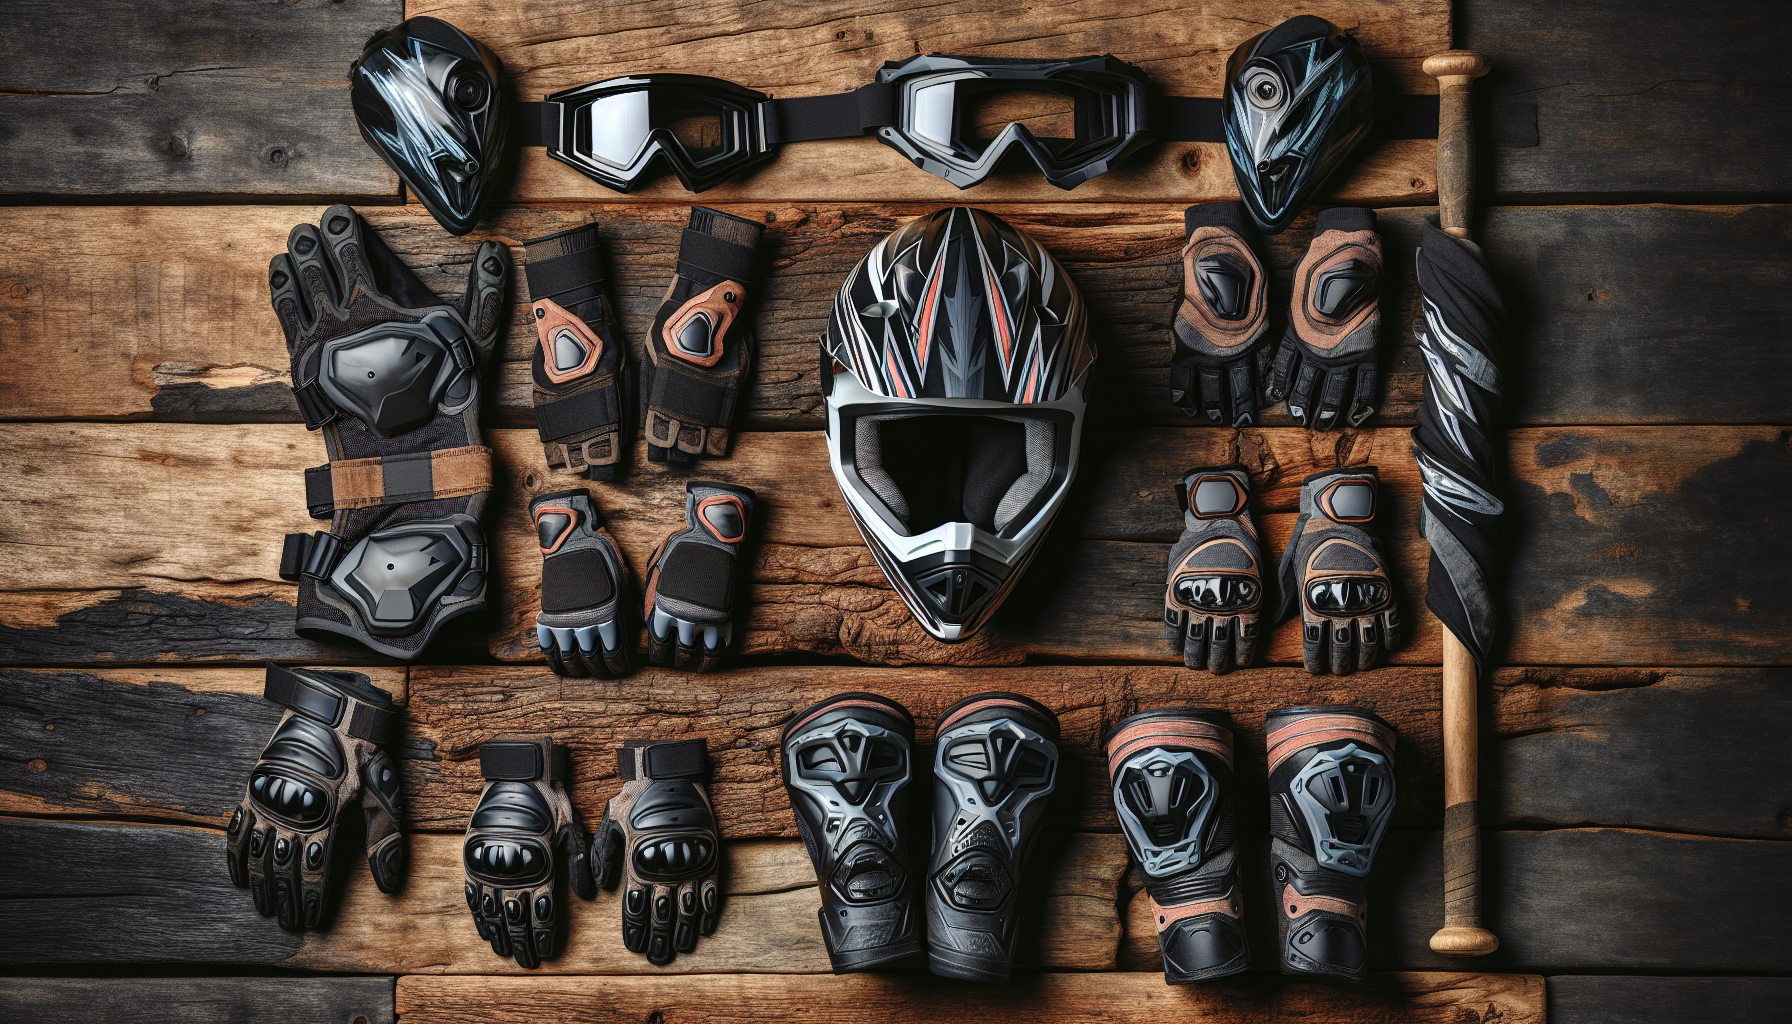 Dirt Bike Gear Essentials: A guide to the must-have safety gear and accessories for riders.